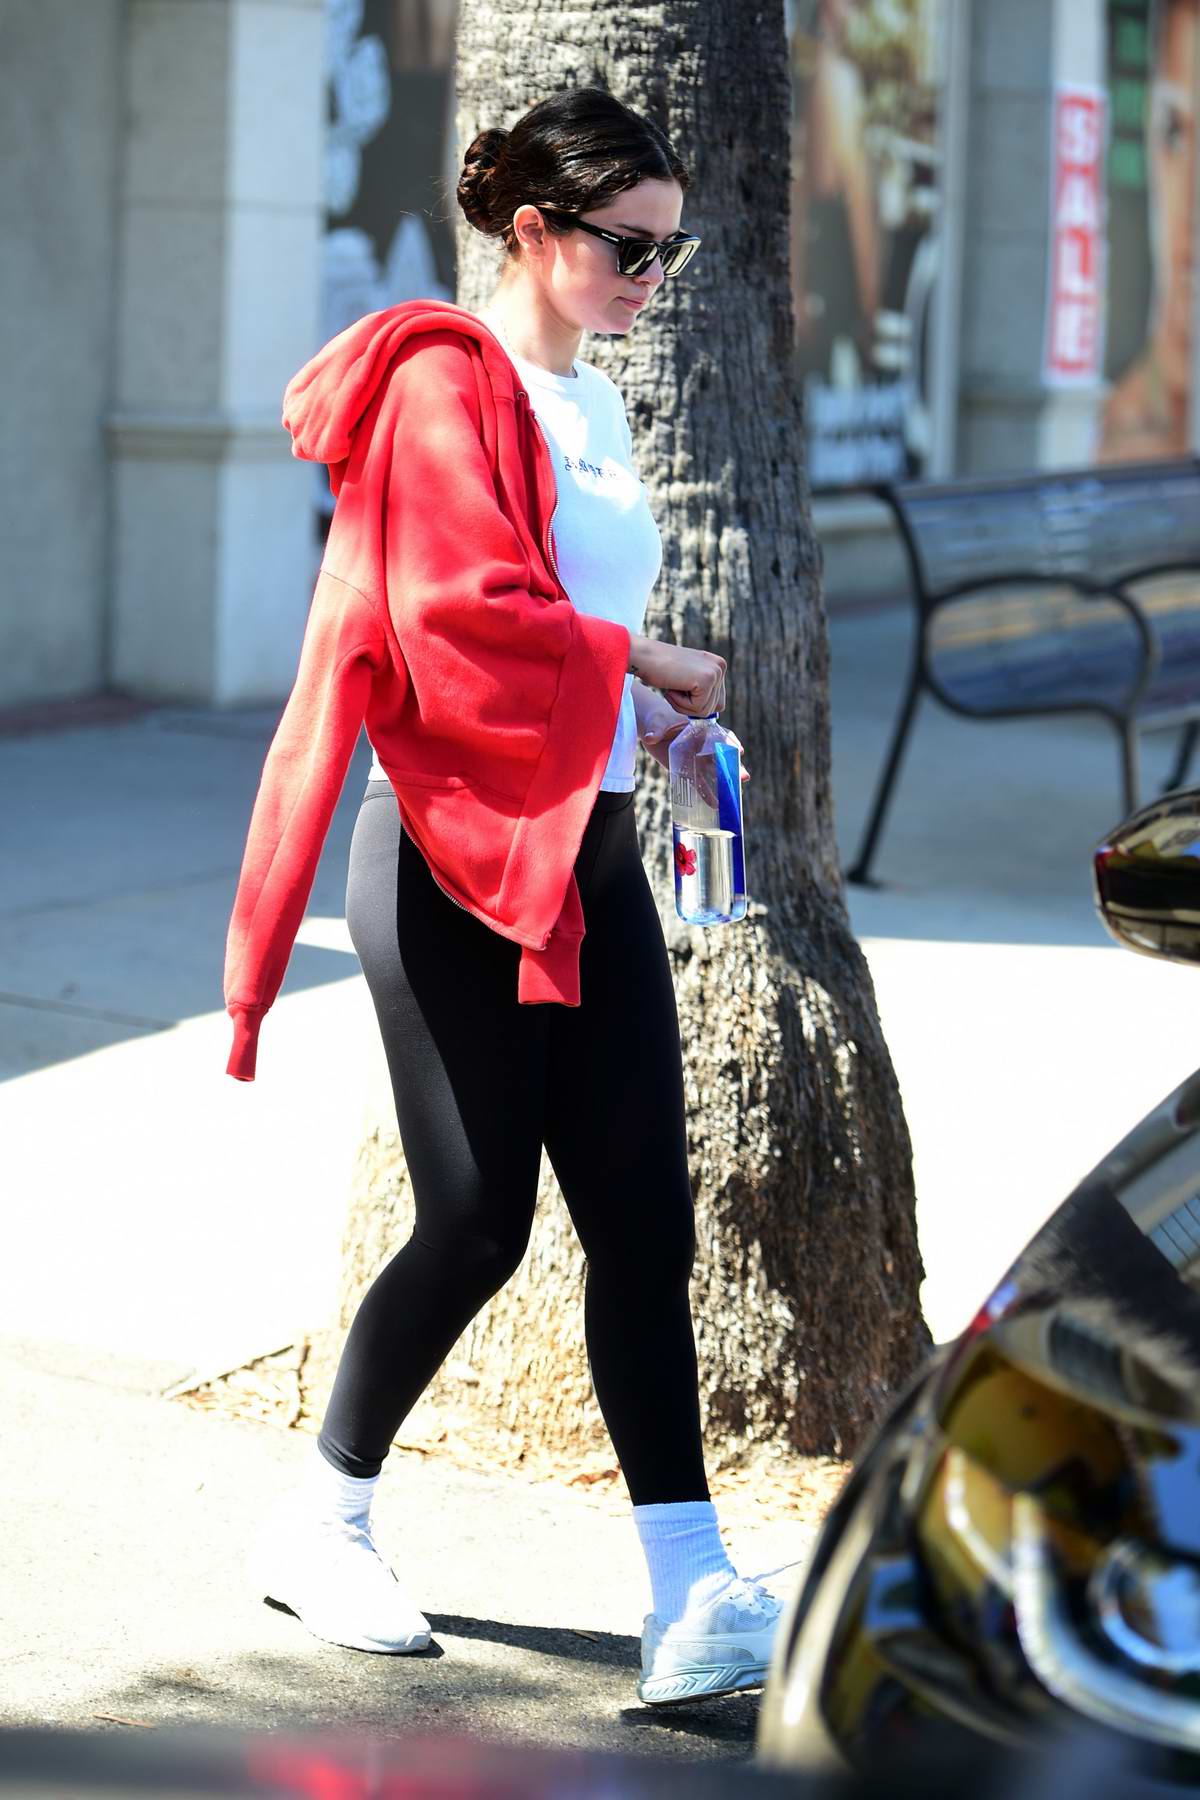 selena gomez looks great in a white top and black leggings as she